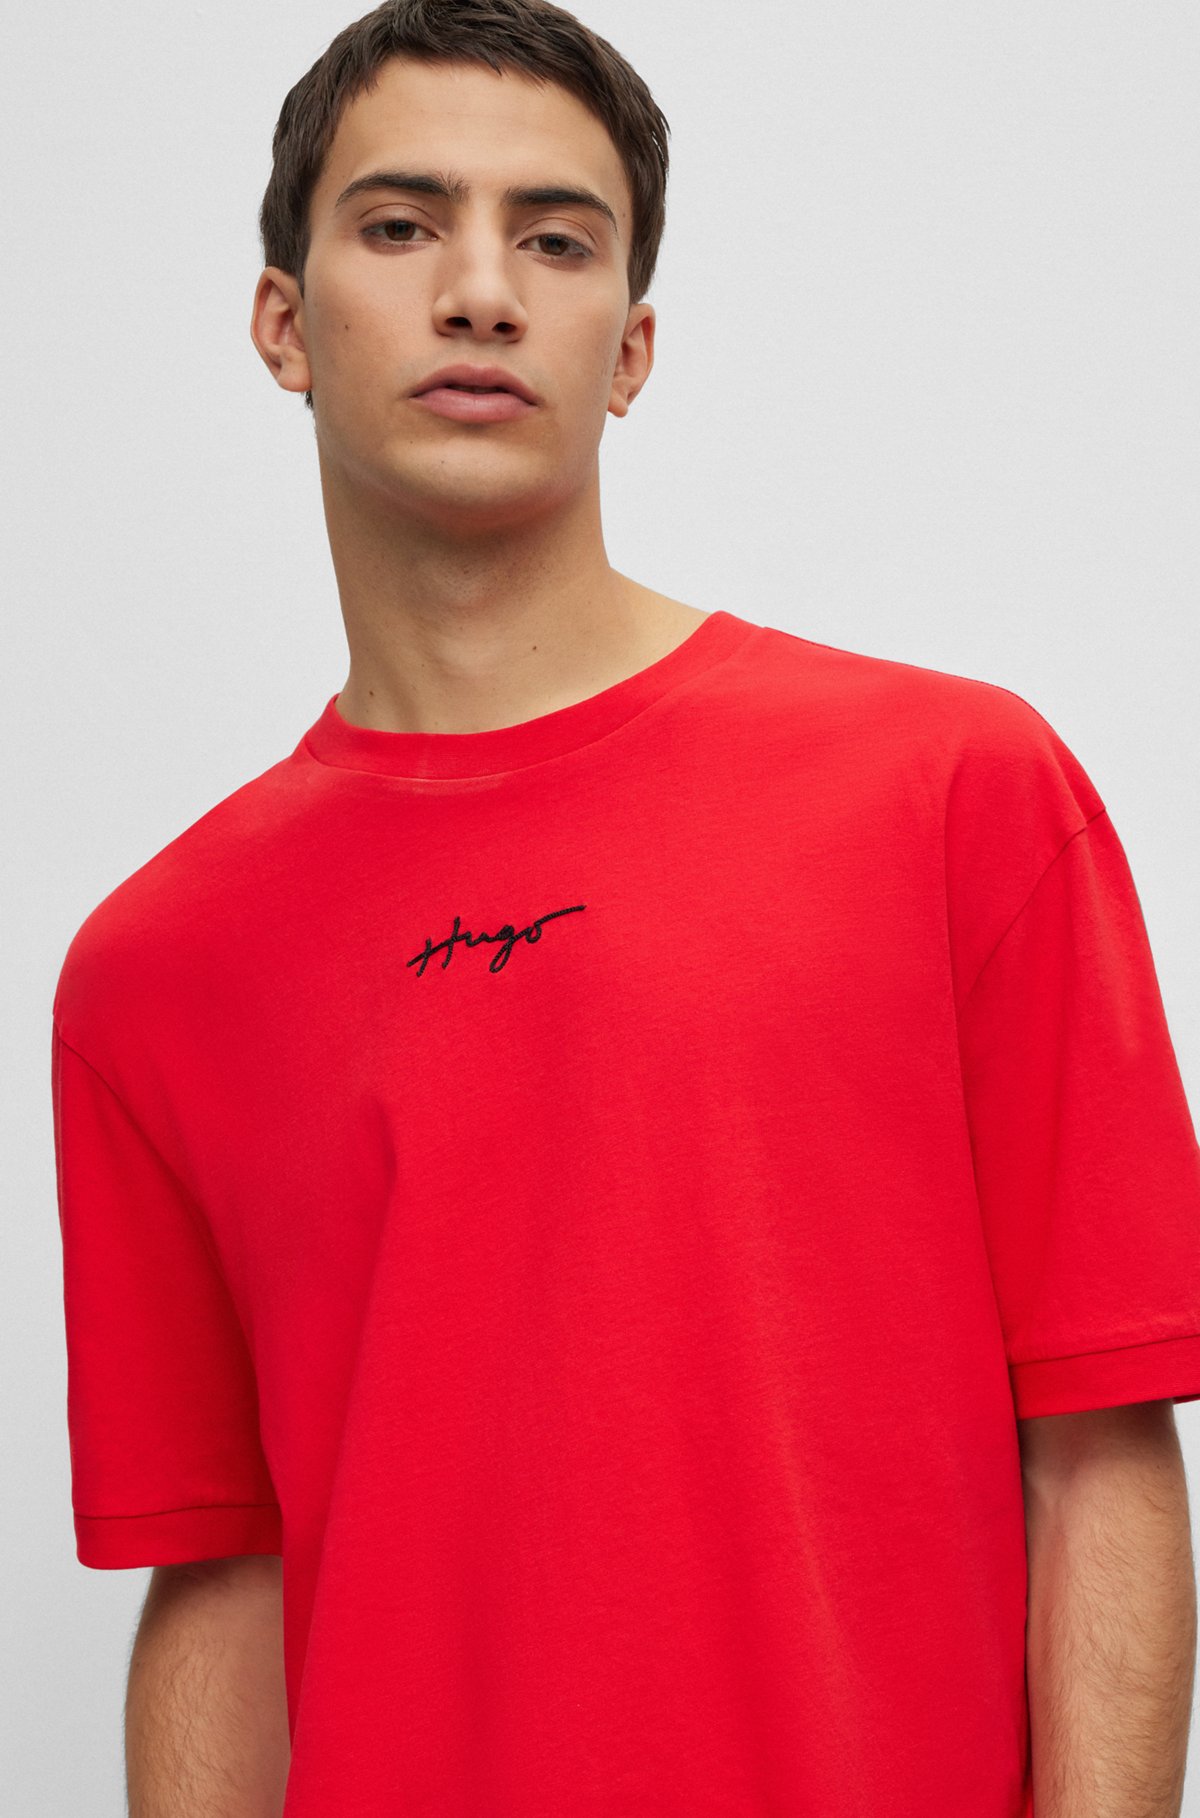 T-shirt relaxed fit in jersey di cotone con logo ricamato, Rosso